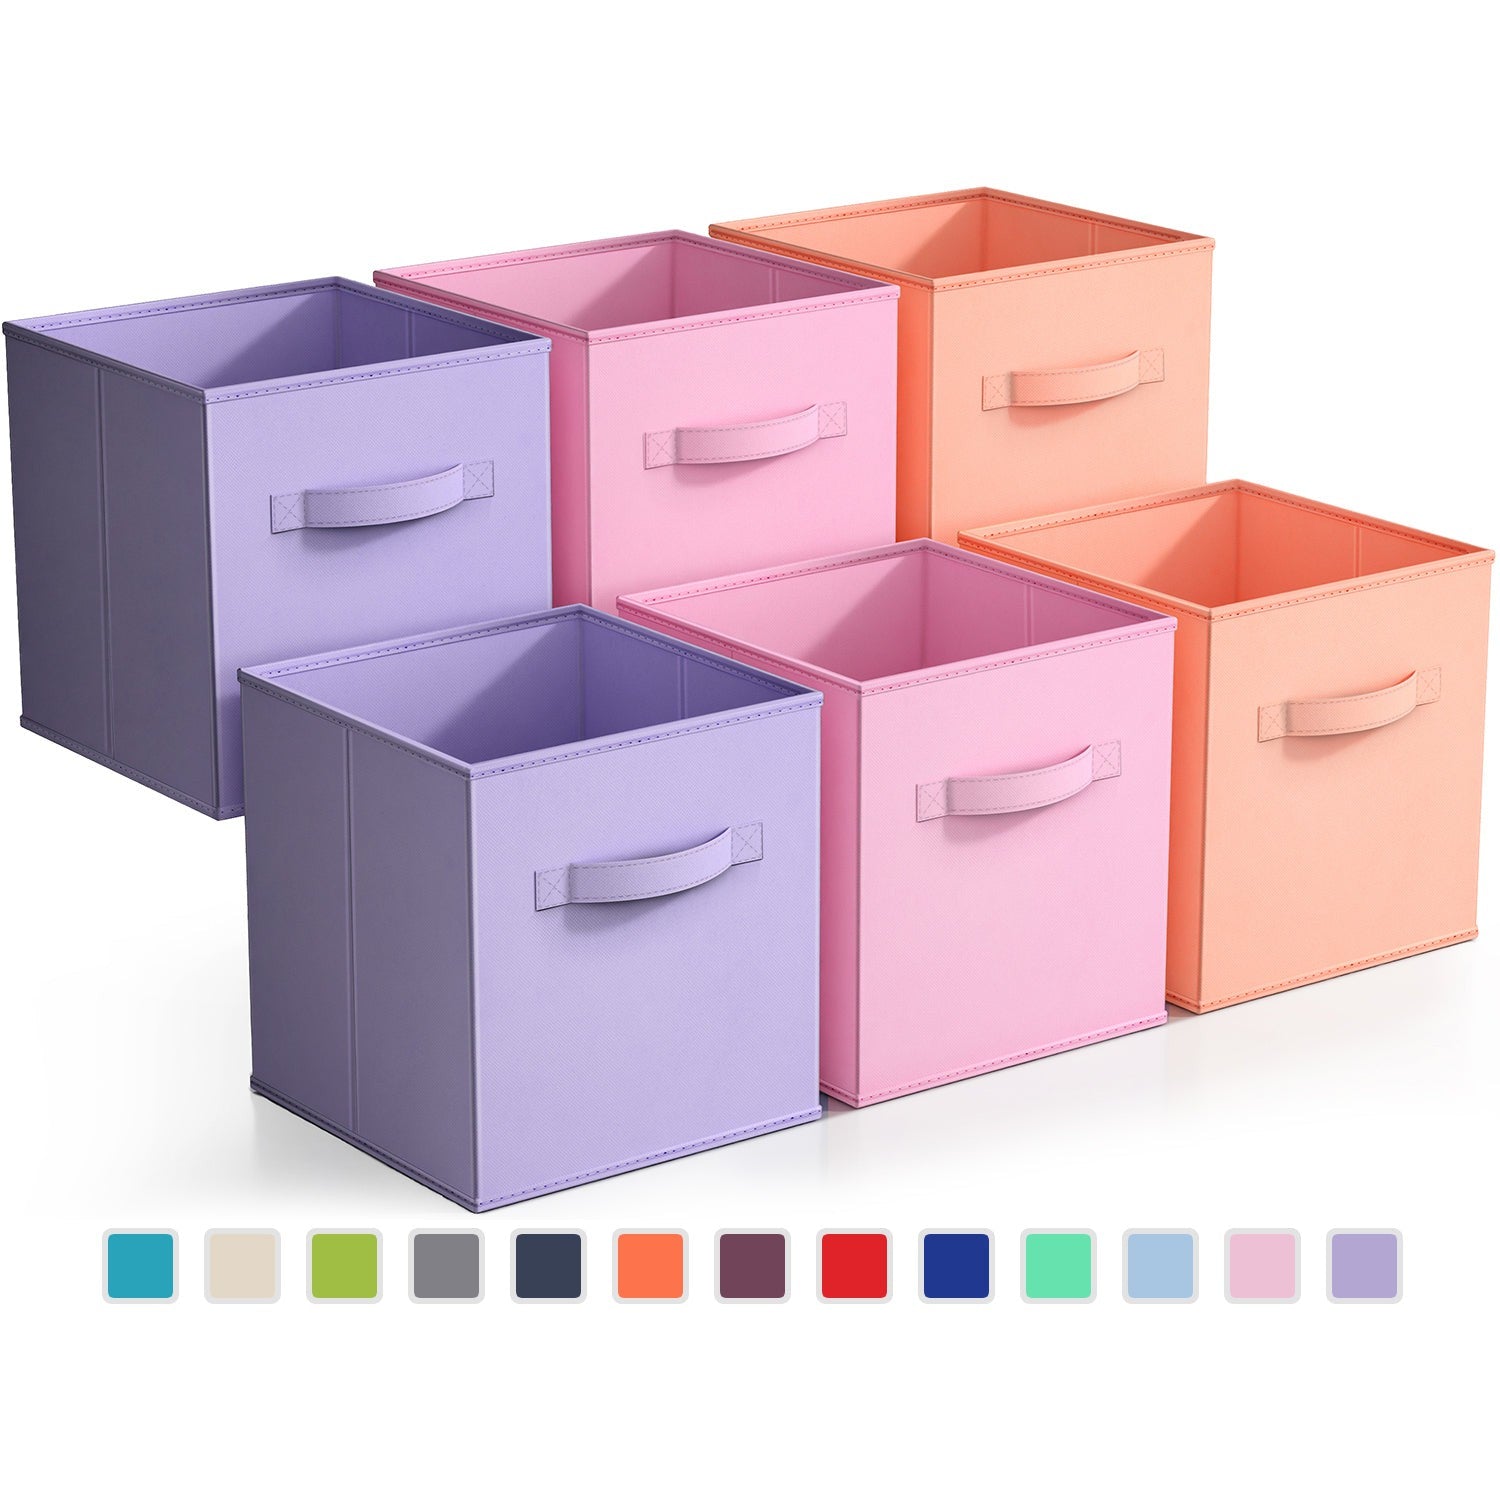 6 Pack Fabric Storage Cubes. 11 Inch Cube Storage Bins with Handle,  Foldable Closet Organizers for Shelves, Storage Baskets for Shelves